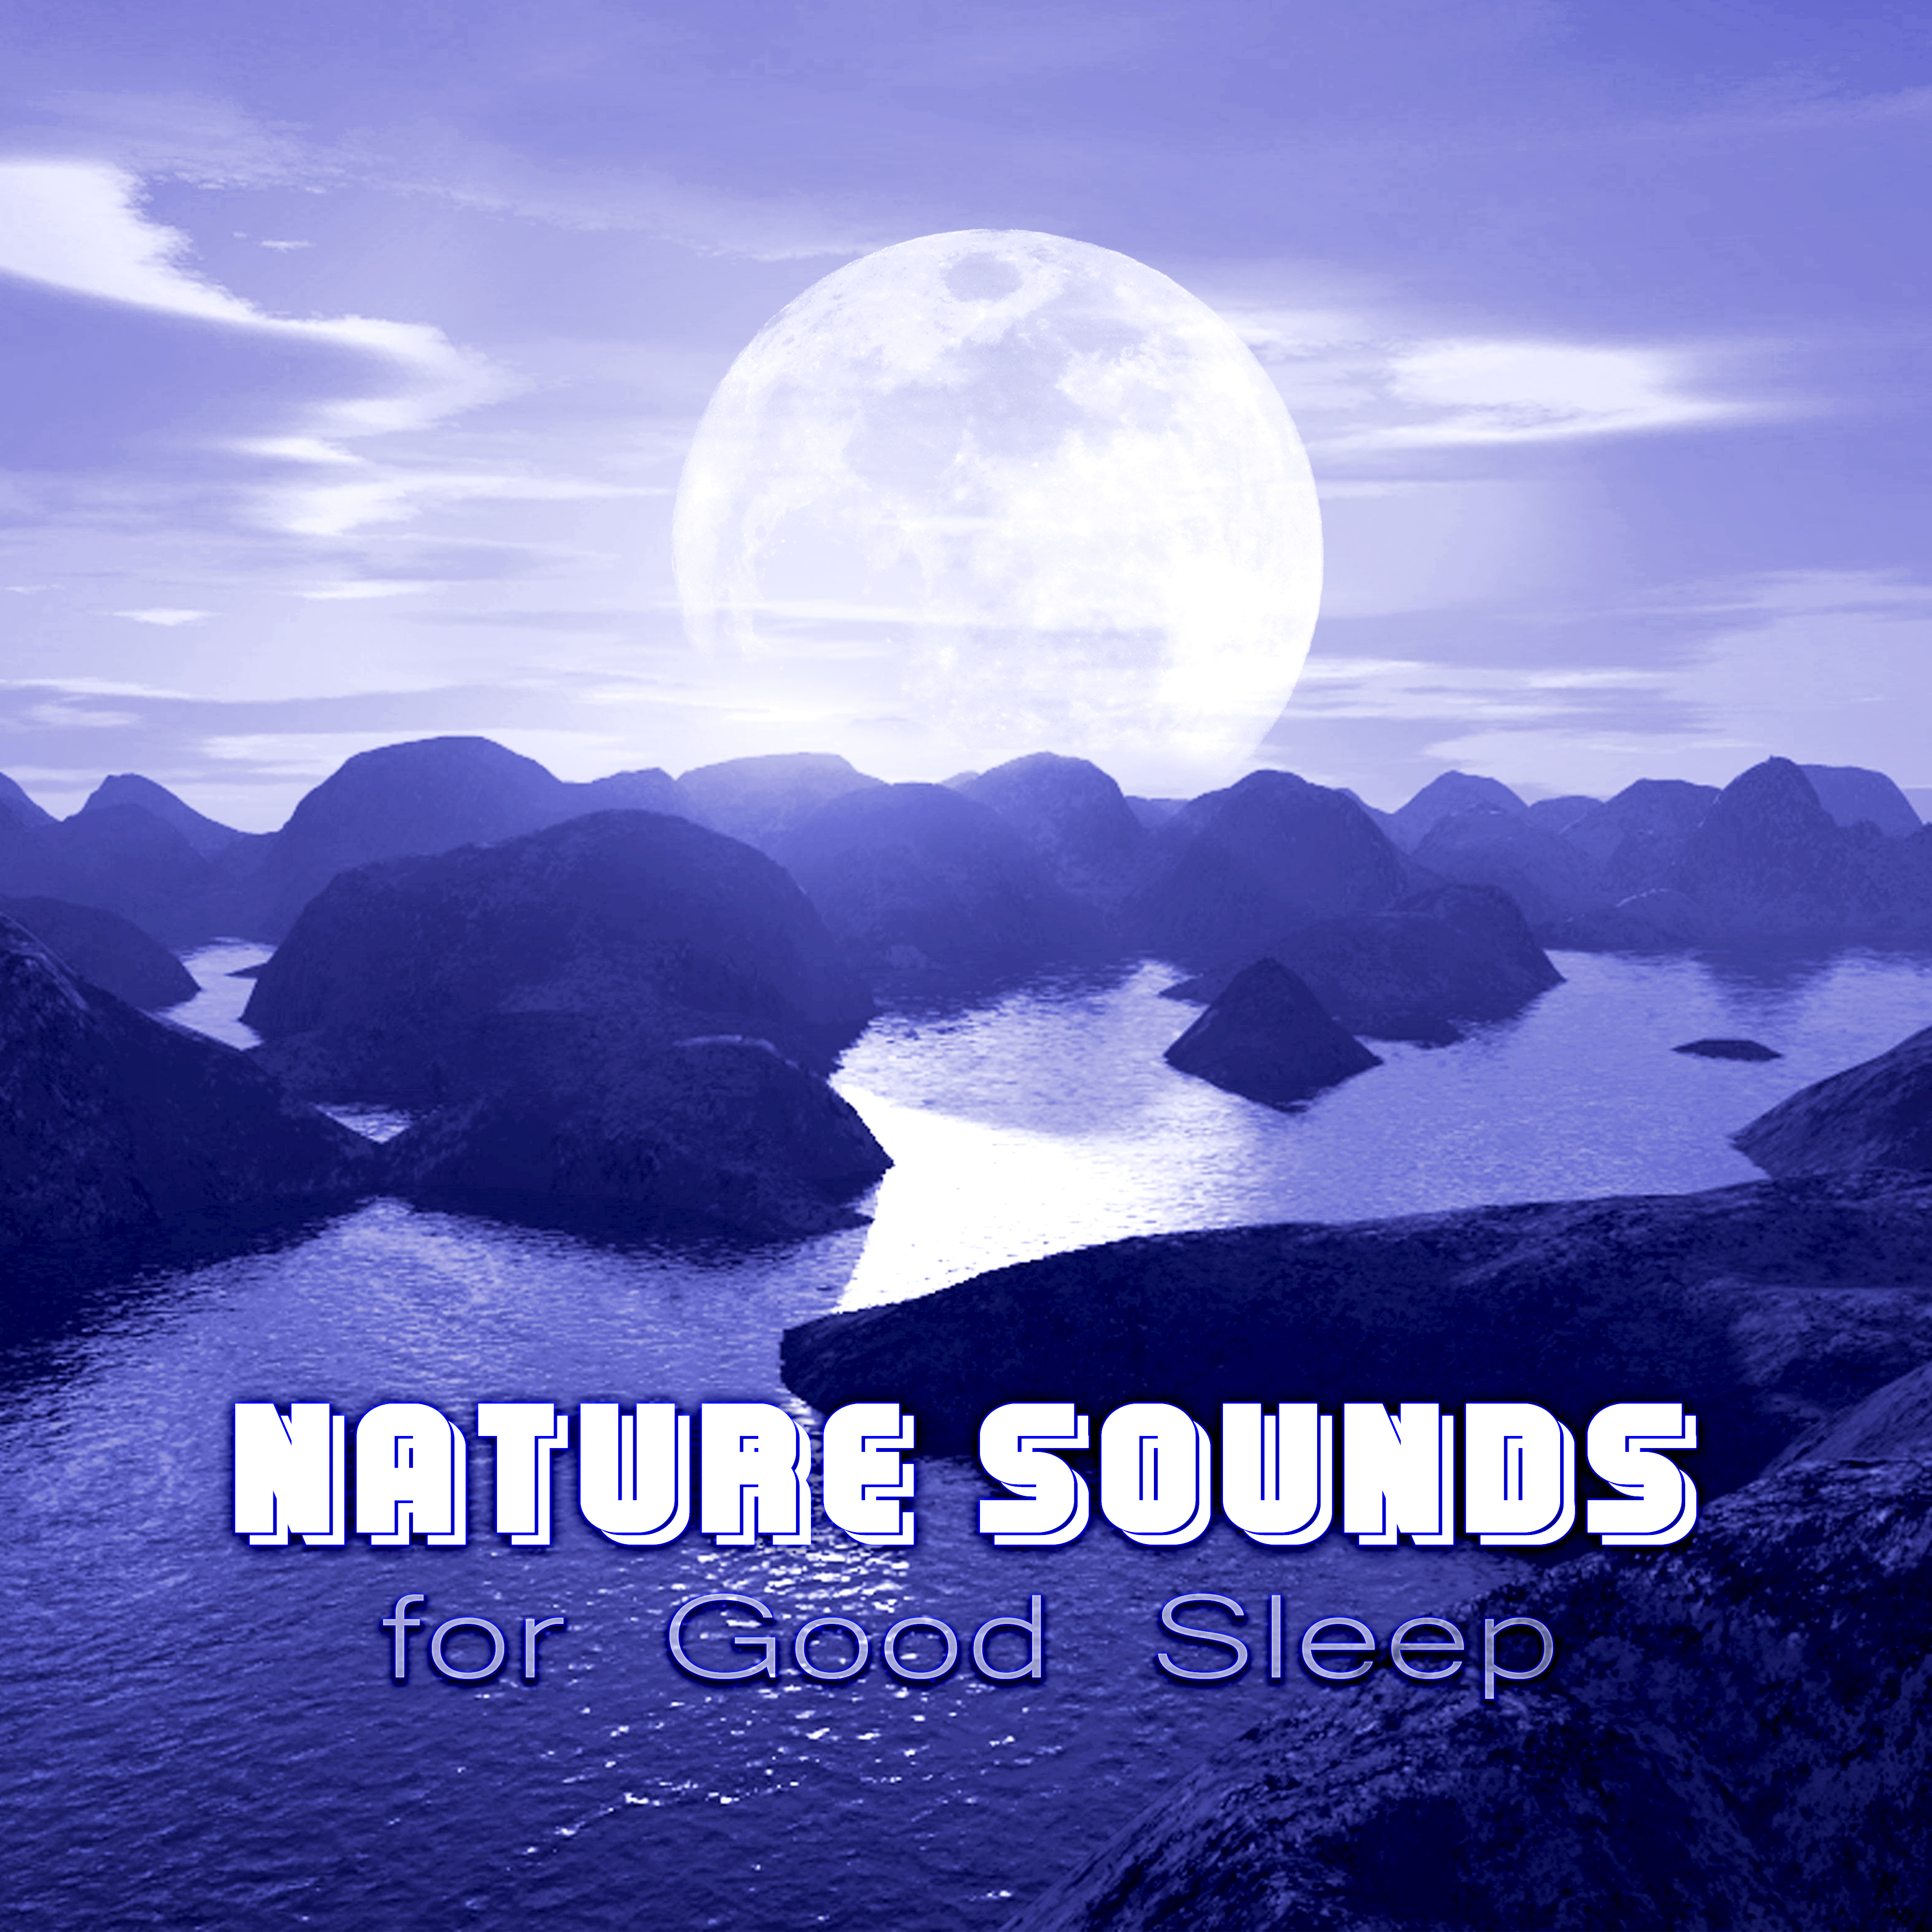 Nature Sounds for Good Sleep  Relaxing Music to Calm Down, White Noise to Fall Asleep, Piano Lullabies, Meditate, Massage, Yoga